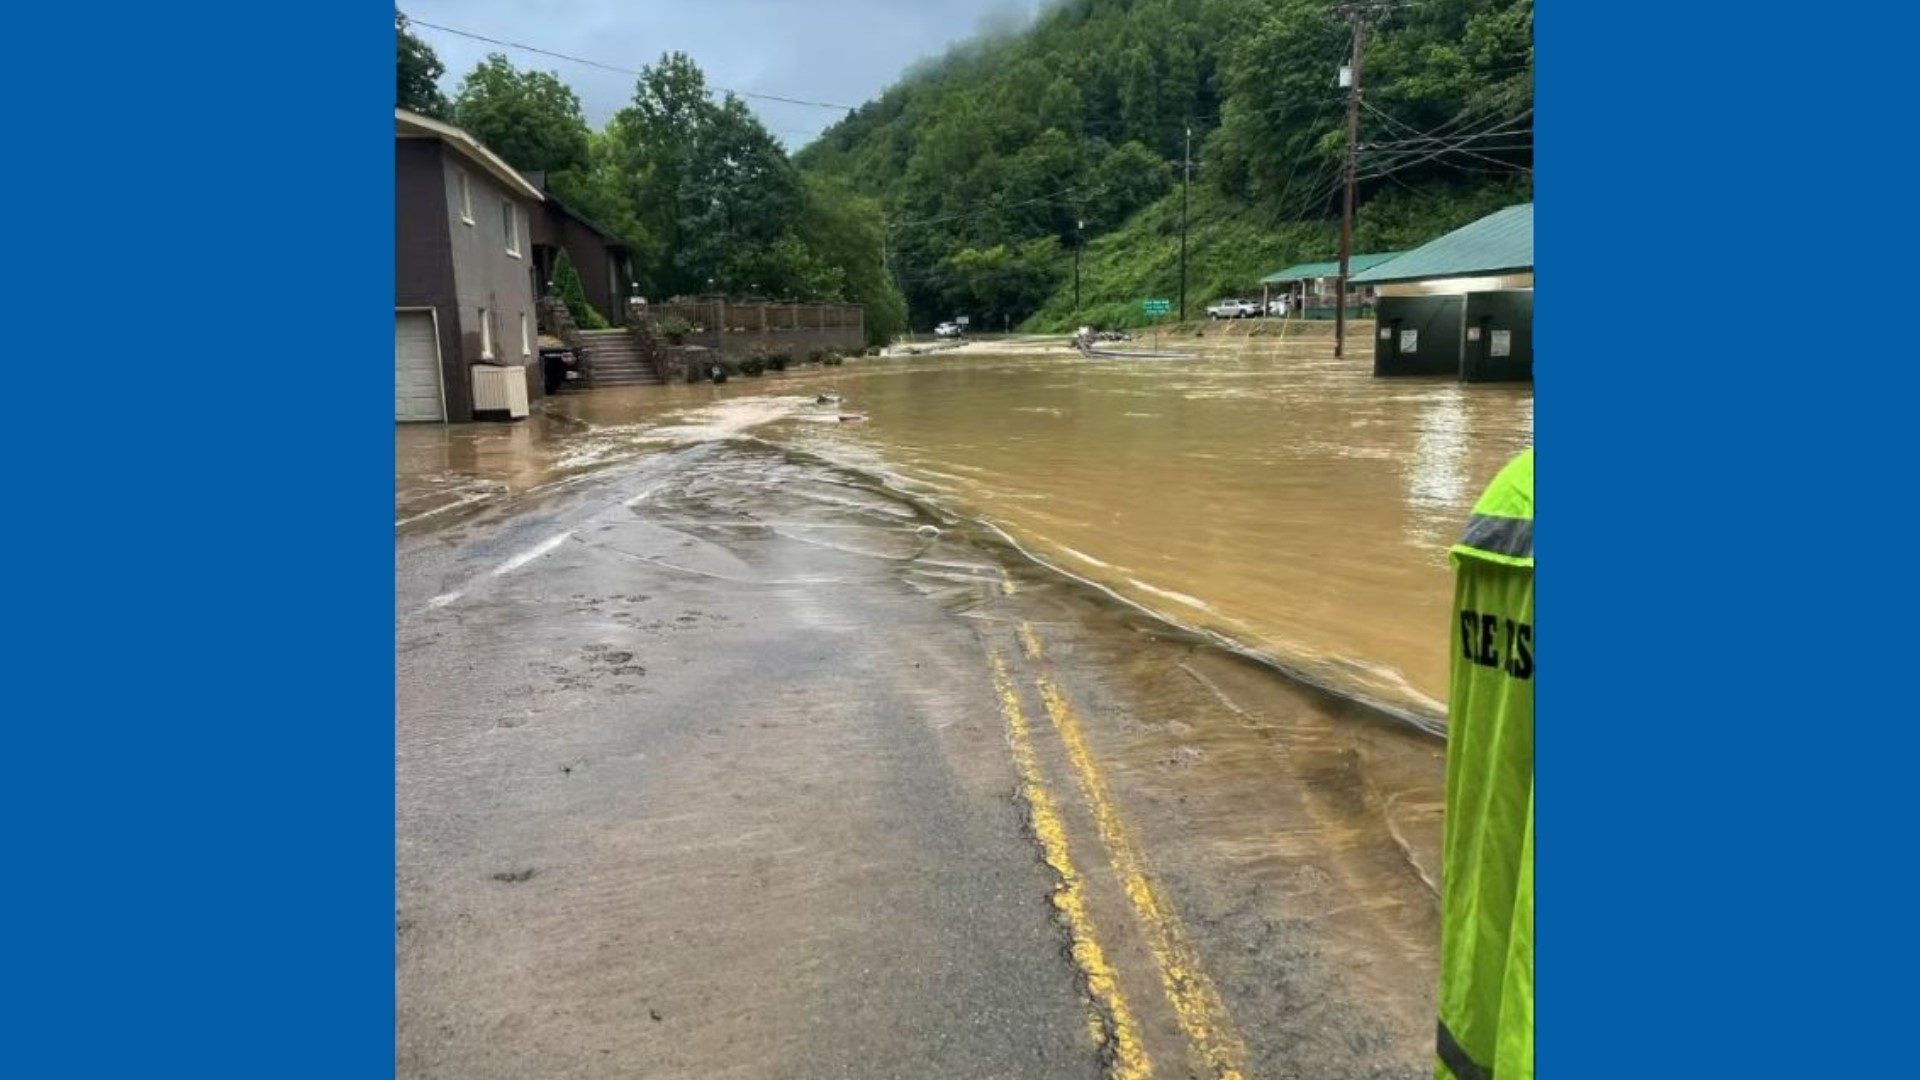 These are some of the first calls for help that Perry County Fire and Rescue received following catastrophic flooding in eastern Kentucky.